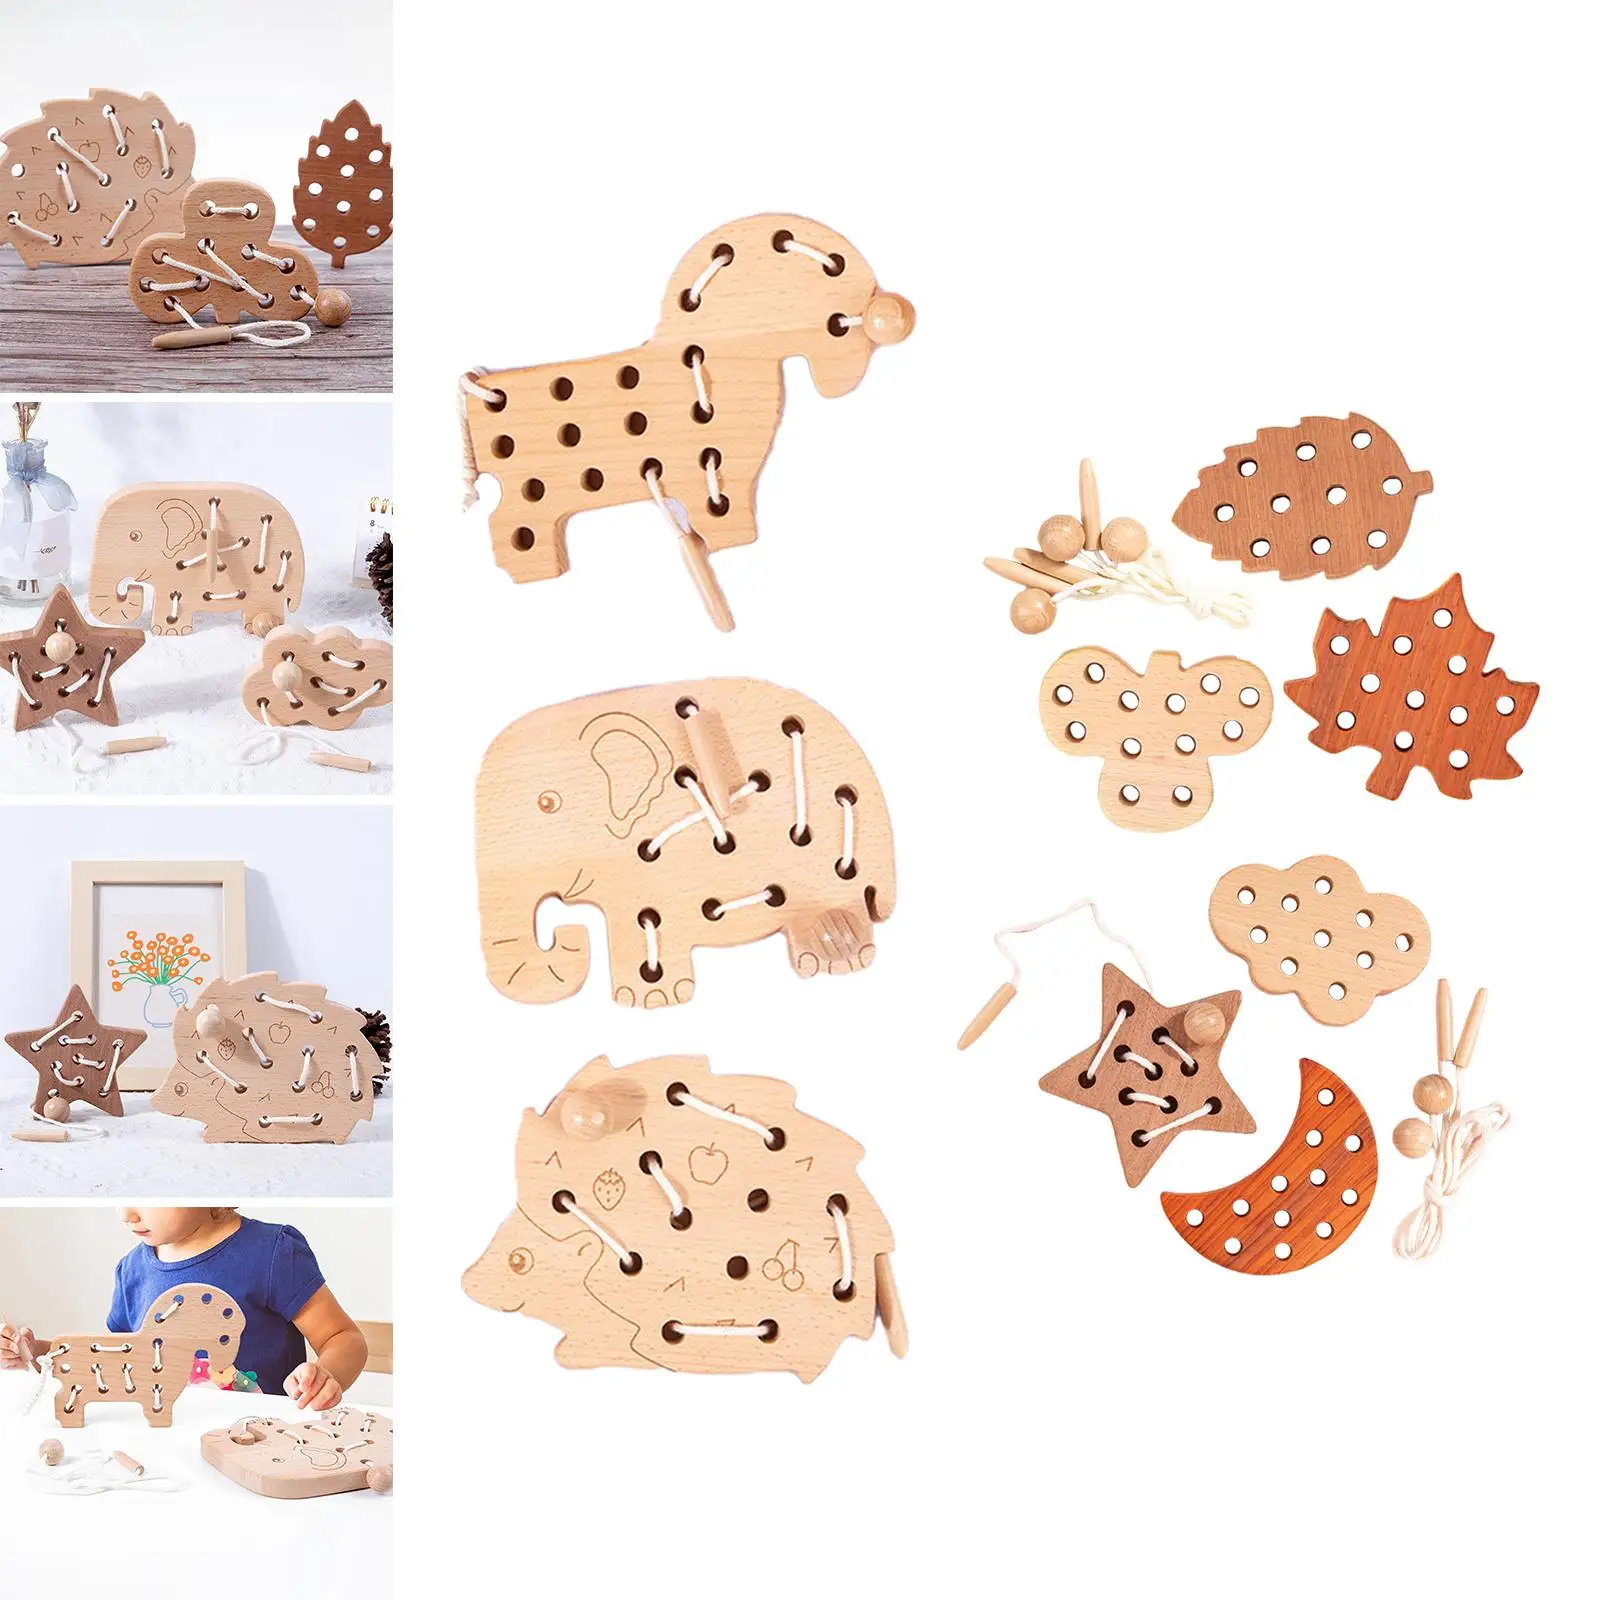 3x Wood Lace Block Puzzle Early Learning Travel Montessori Toys Wooden Lacing Threading for Boys Kids Birthday Gift